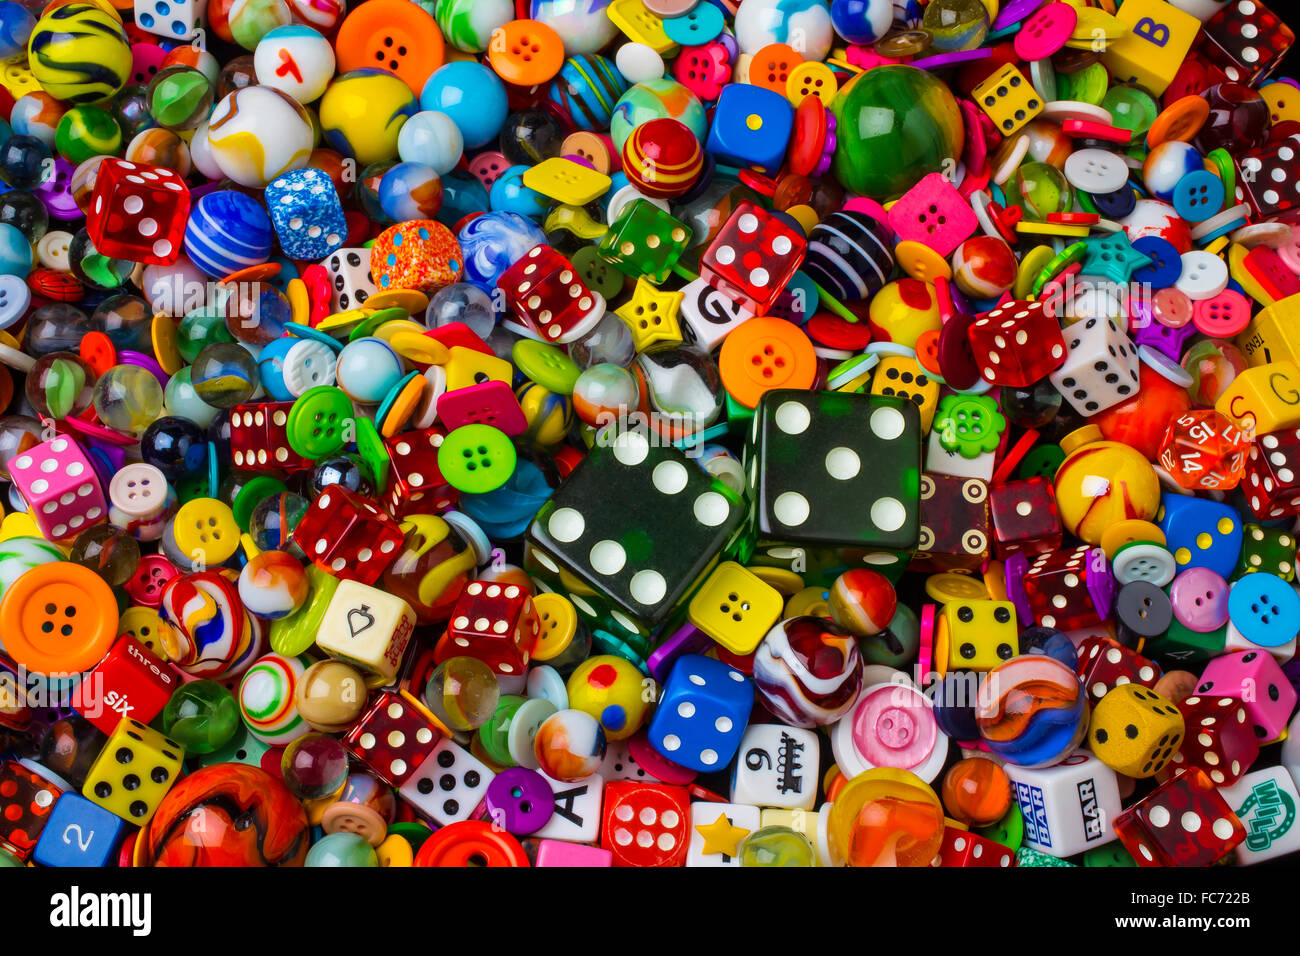 Dice Marbles With Buttons Stock Photo